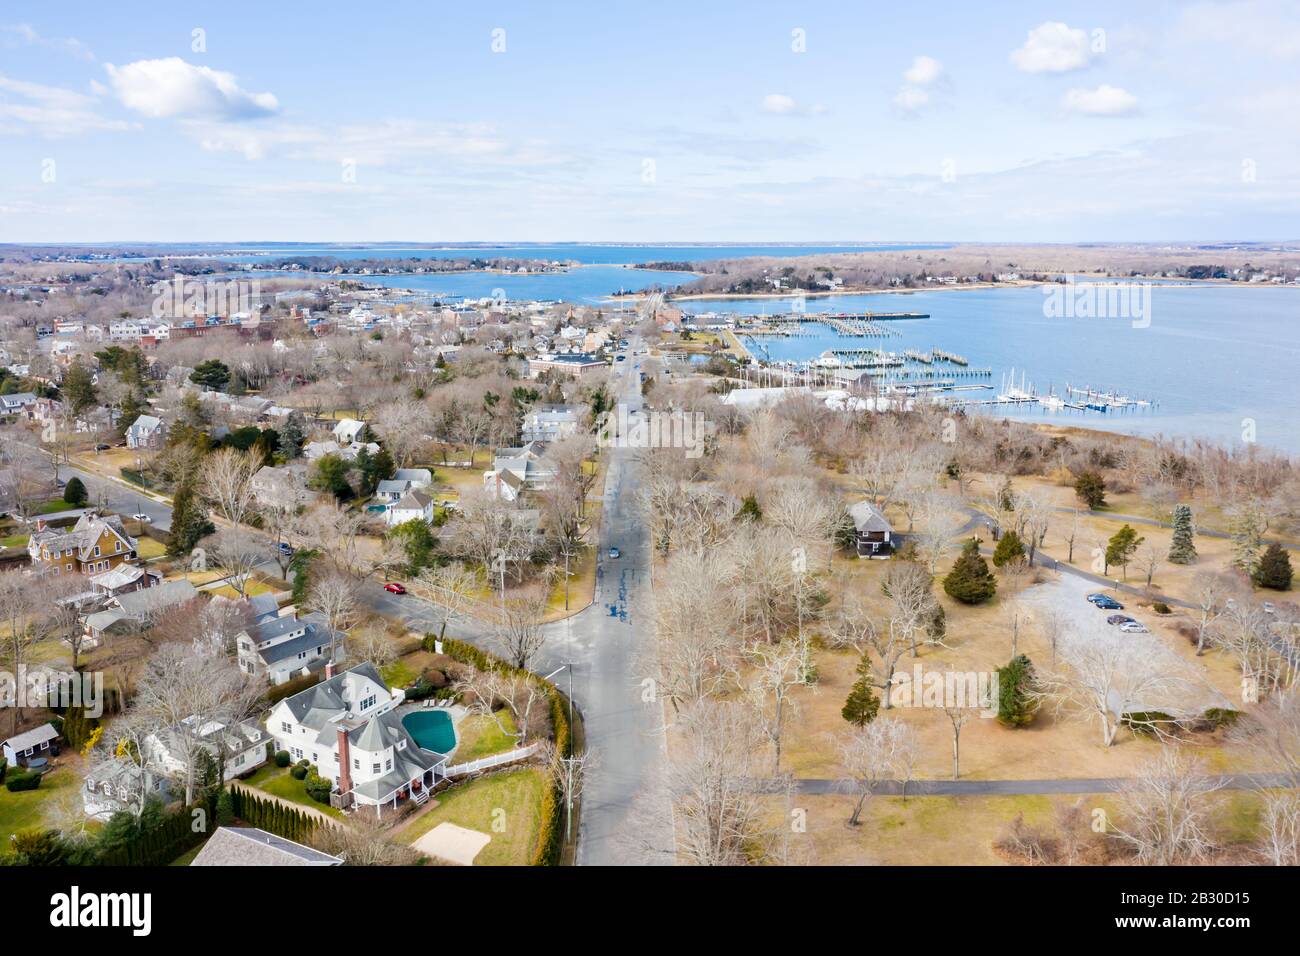 Drone Image looking down Bay Street in Sag Harbor, NY Stock Photo